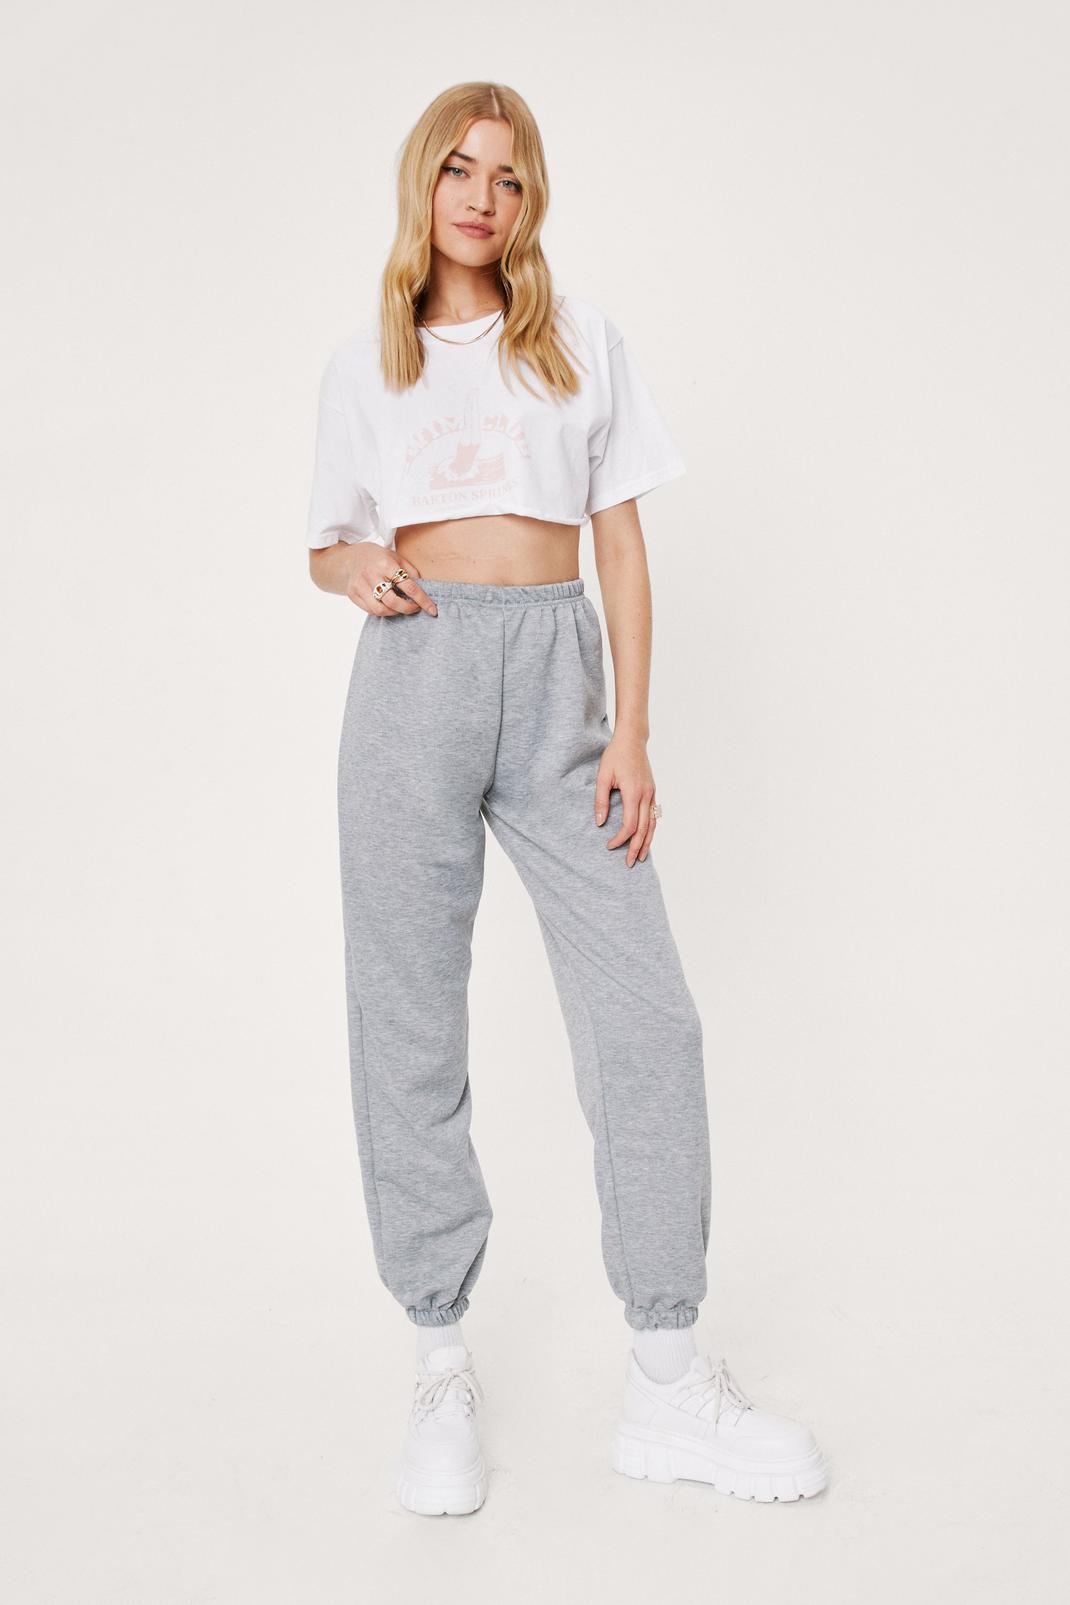 Topshop Petite Oversized 90s Sweatpants In Gray ShopStyle, 58% OFF